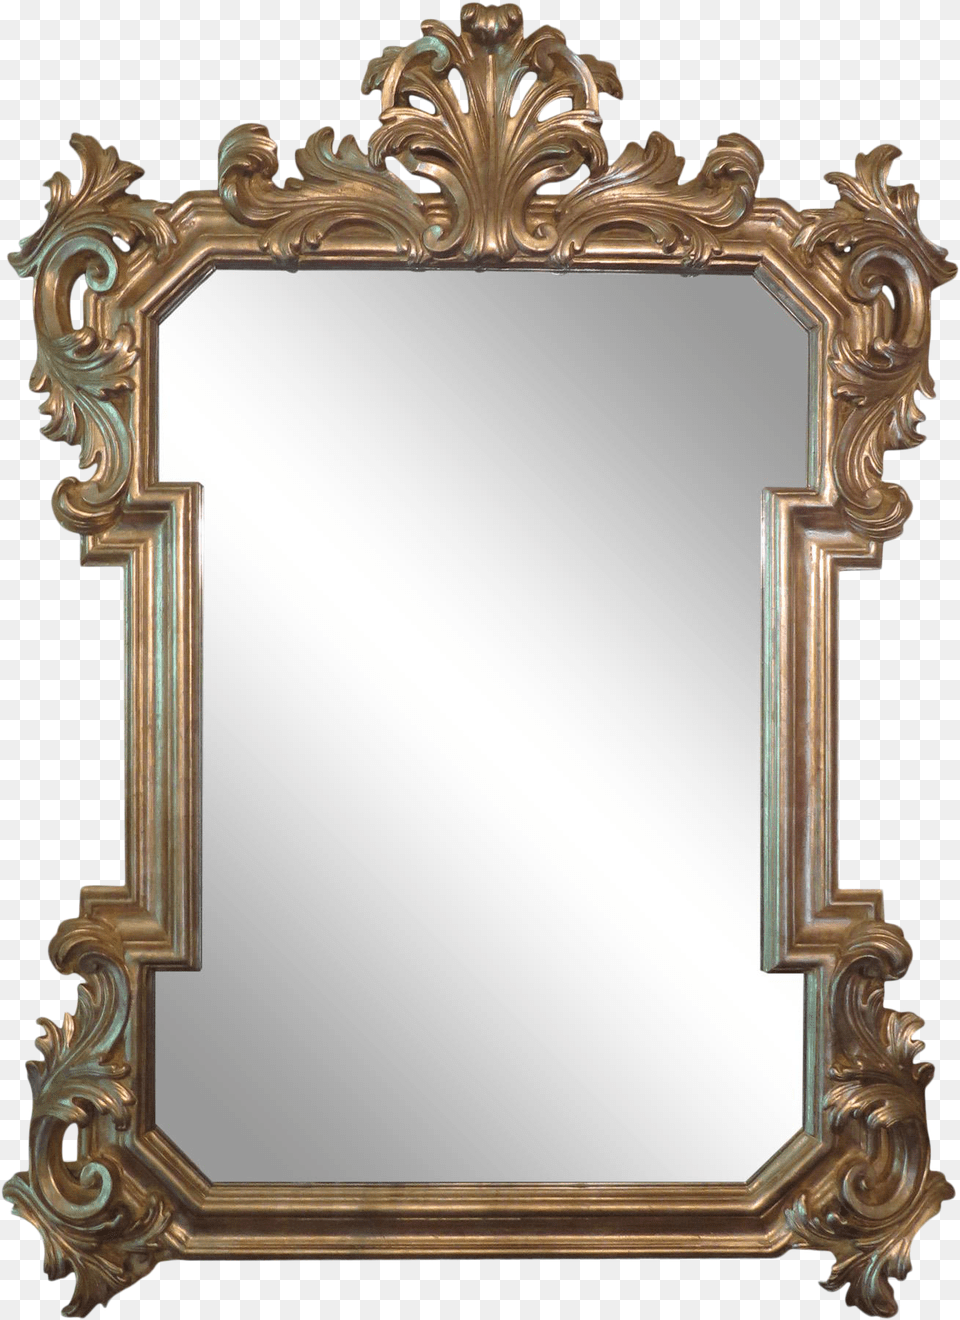 Italian Gold Gilt Ornate Frame Mirror Antique, Photography Png Image